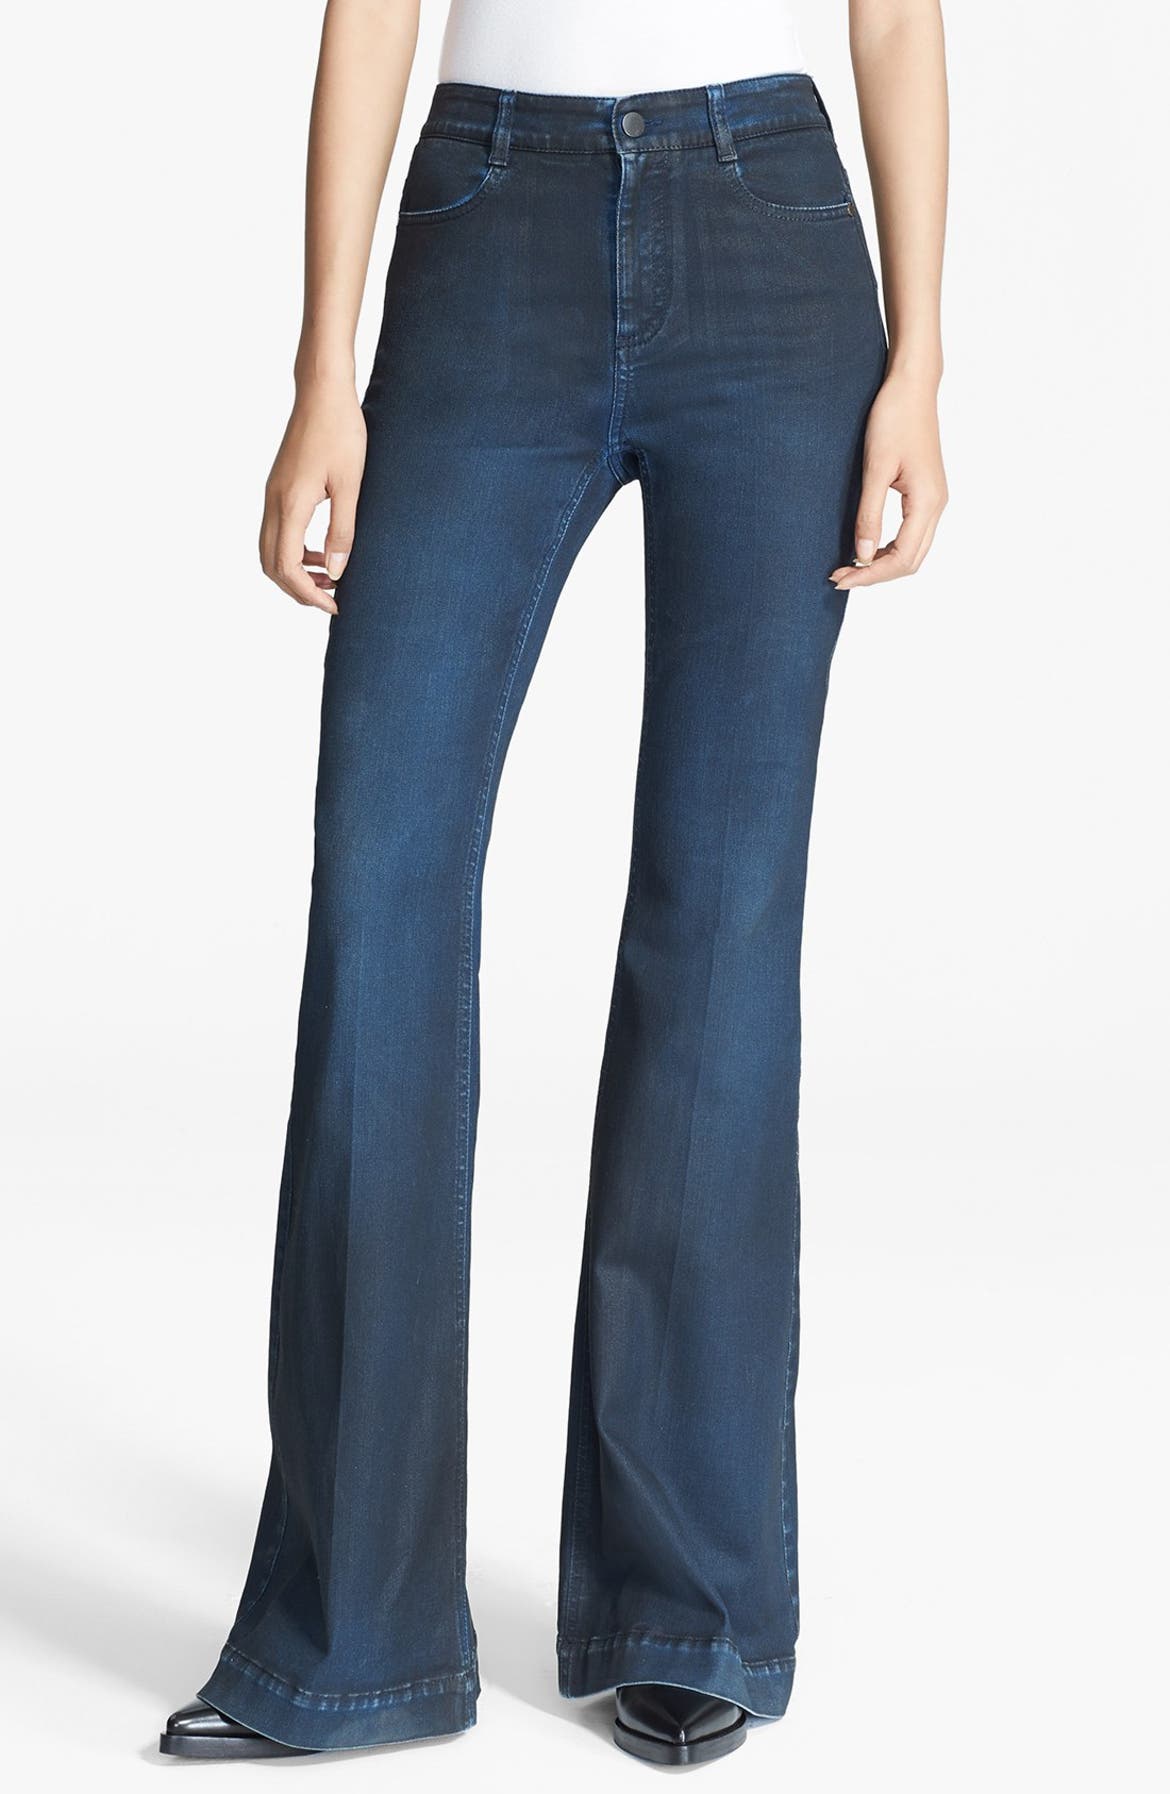 Stella McCartney 'The 70's Flare' Jeans | Nordstrom